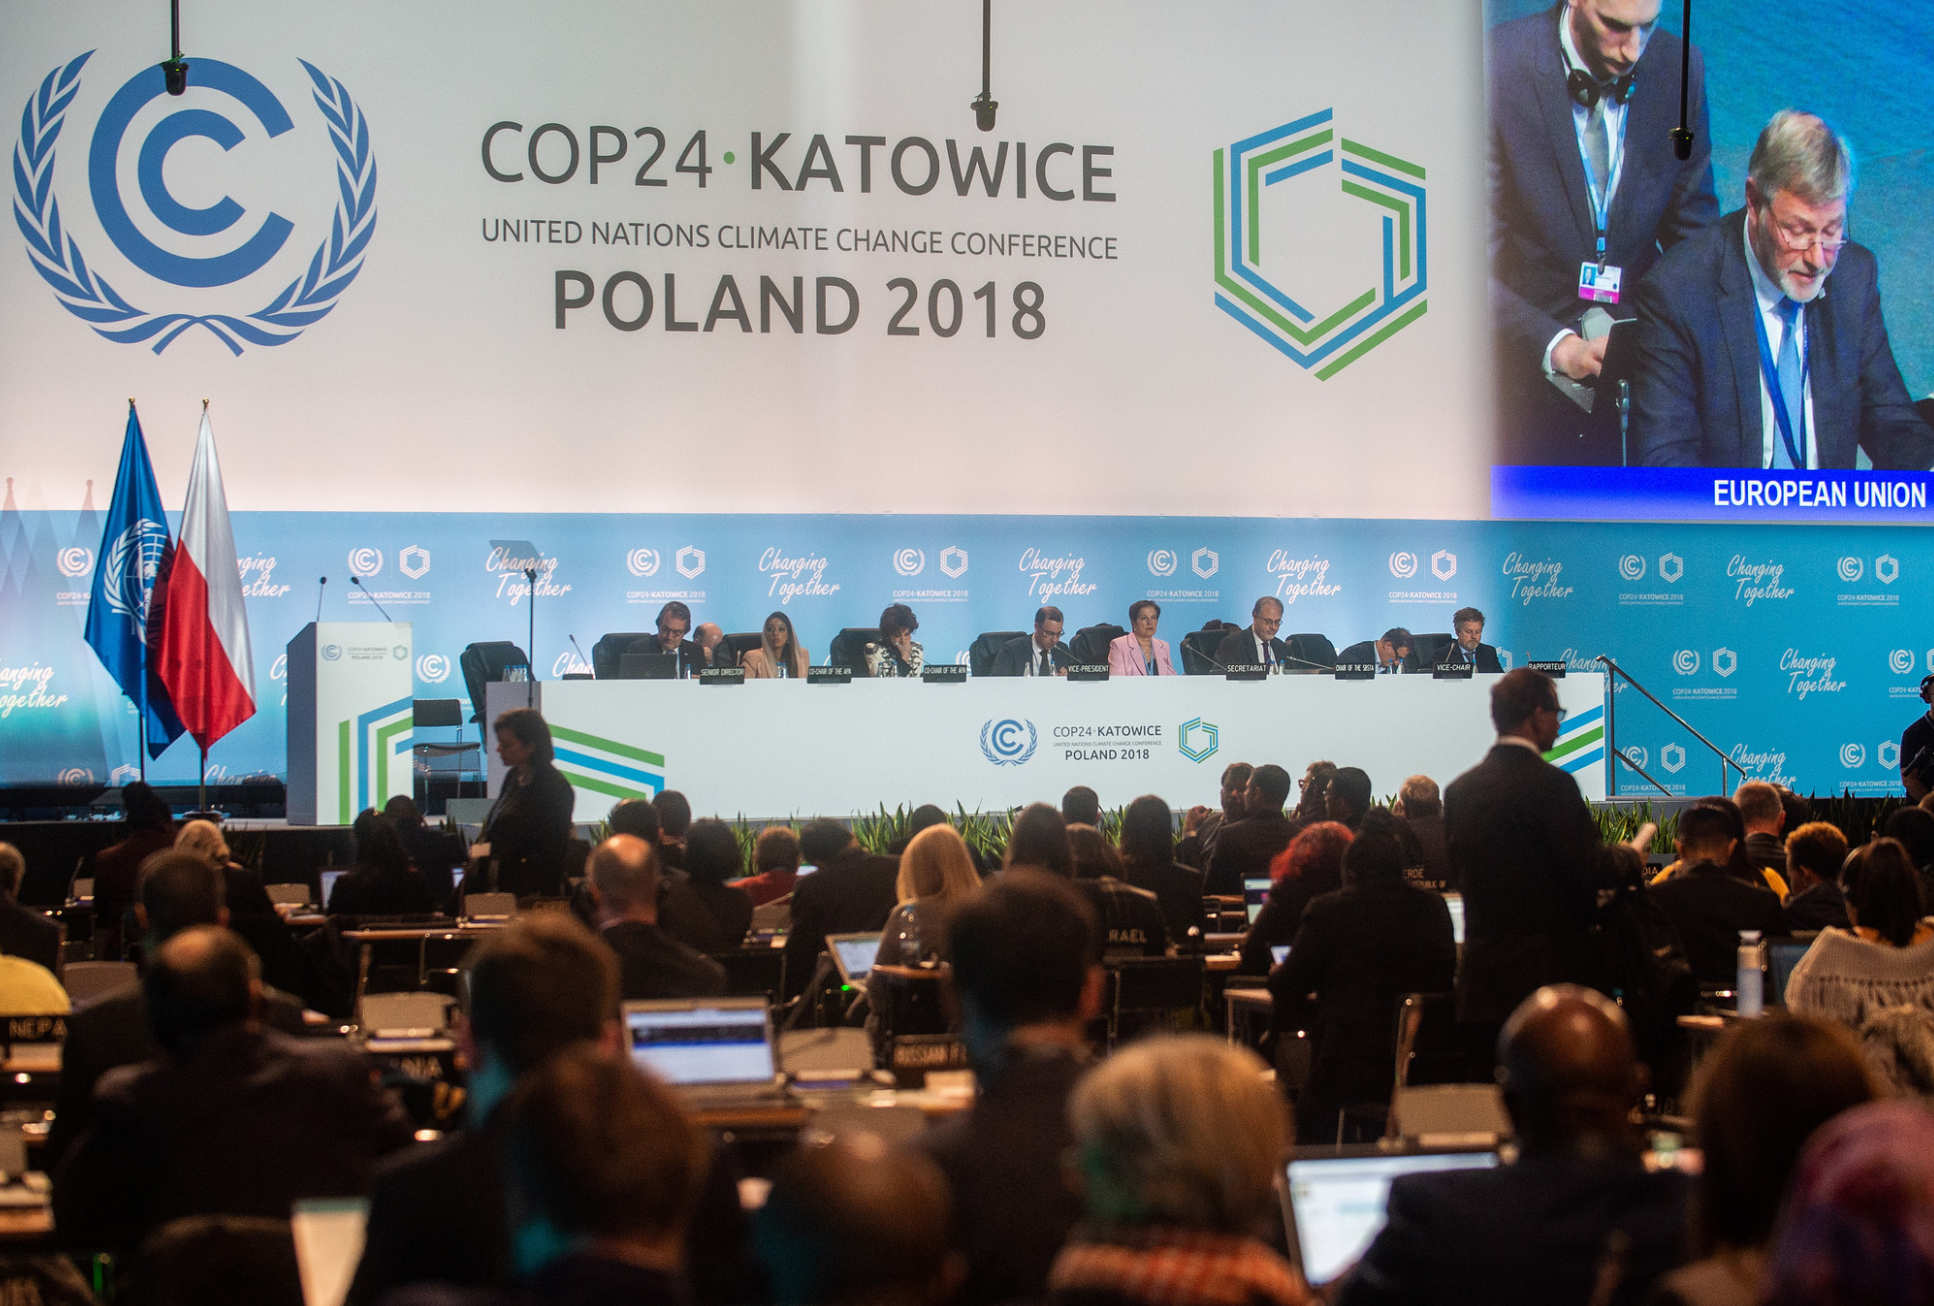 A room full of people looking towards a panel on stage with a sign behind reading "COP24 Katowice Poland 2018"